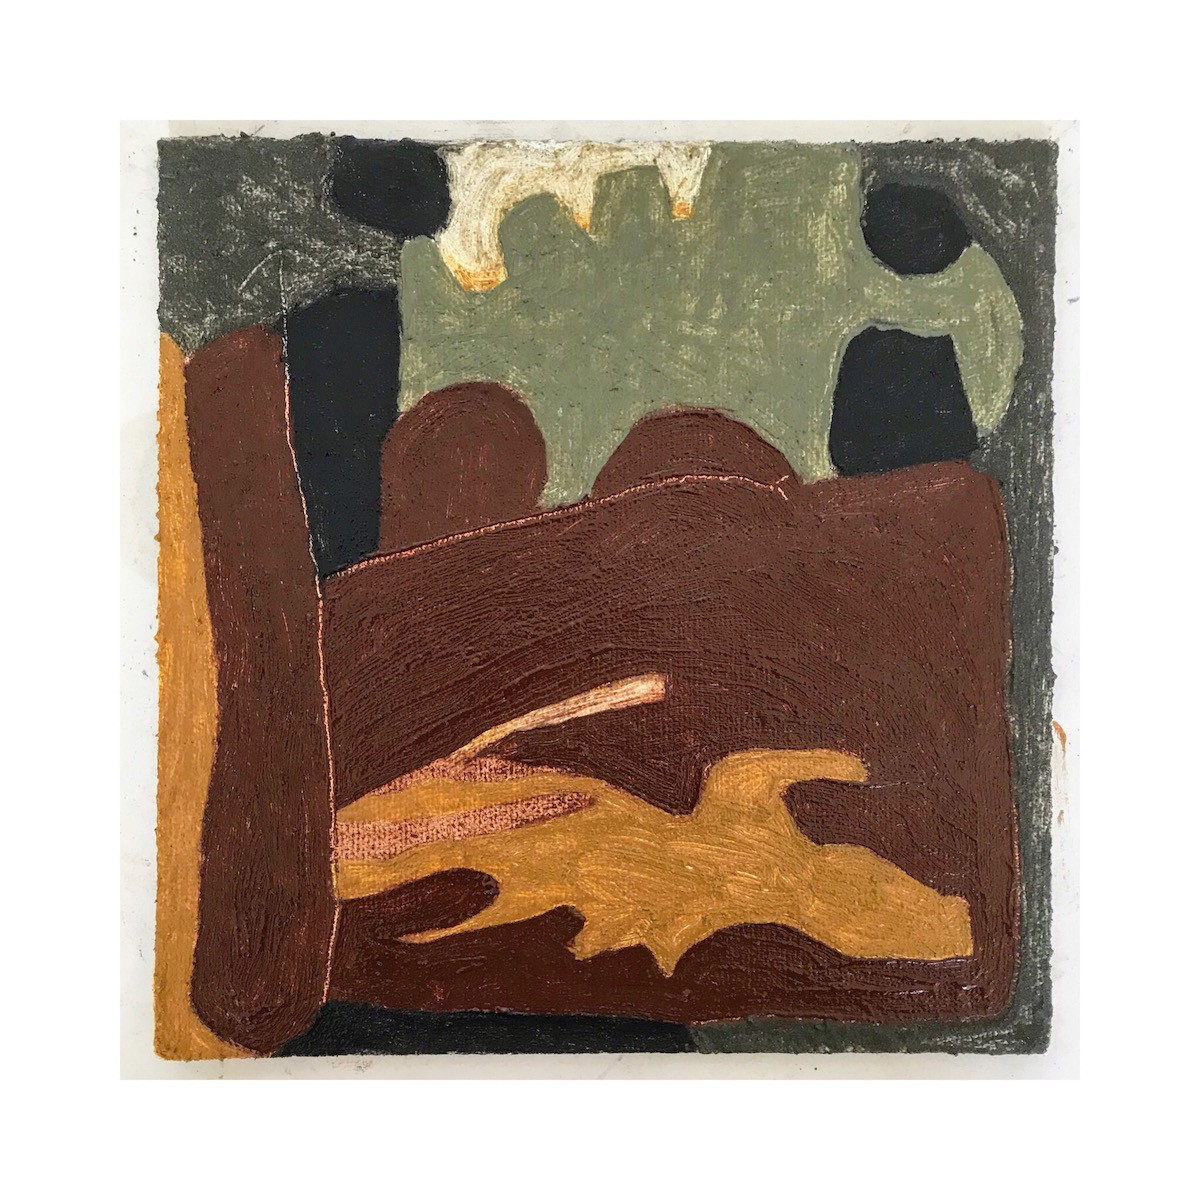 083 a hare's breath (Cornish earth pigments and linseed oil on primed salvaged board; 39x39cm)